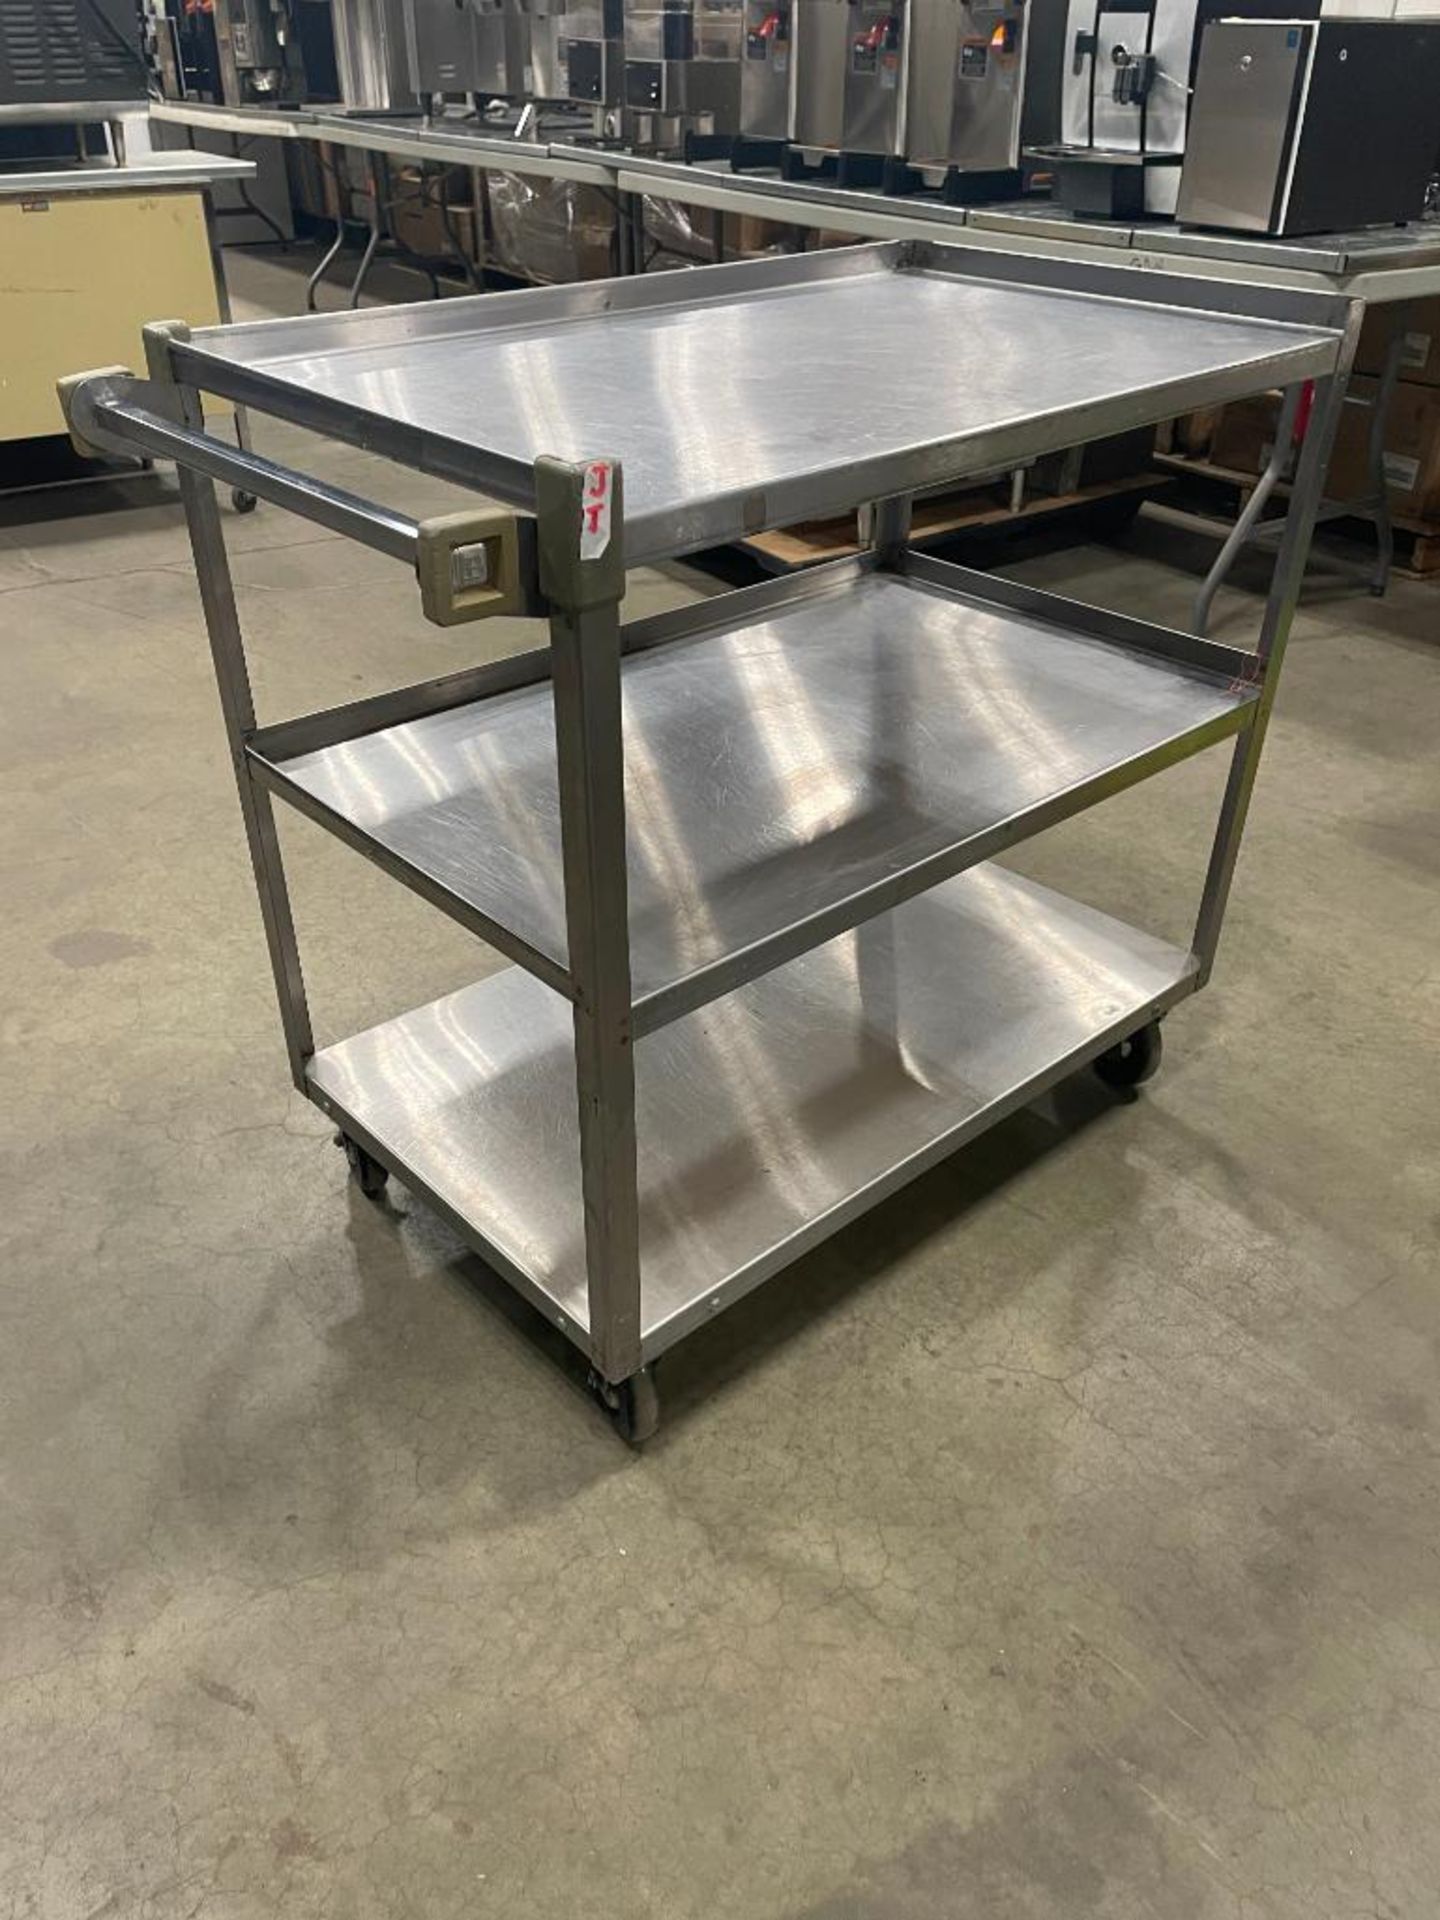 BLOOMFIELD 3-TIER STAINLESS STEEL BUSSING CART - Image 4 of 6